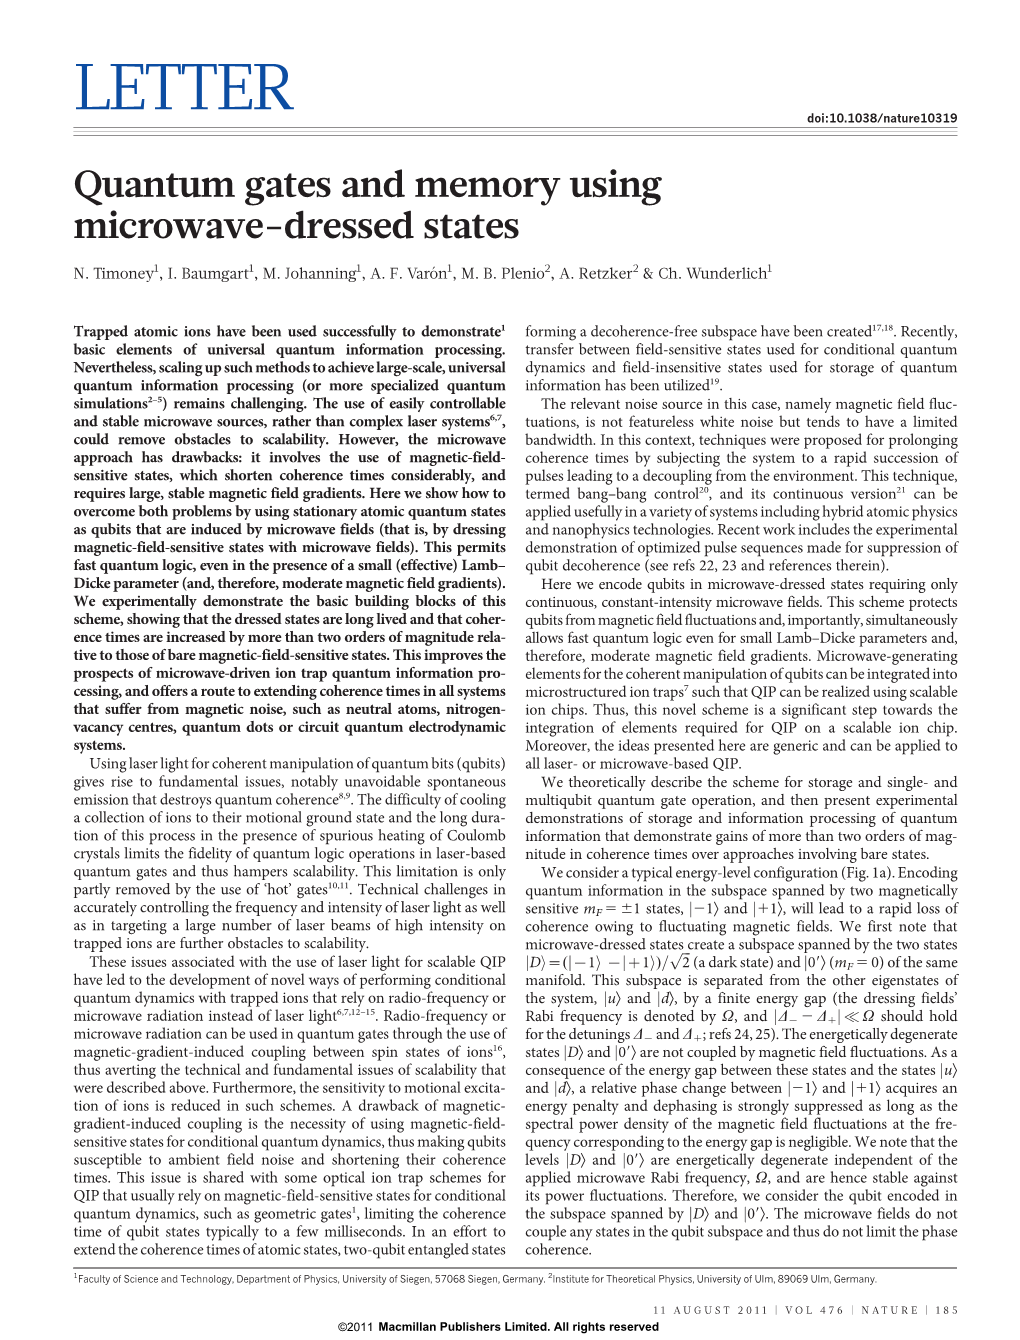 Quantum Gates and Memory Using Microwave-Dressed States